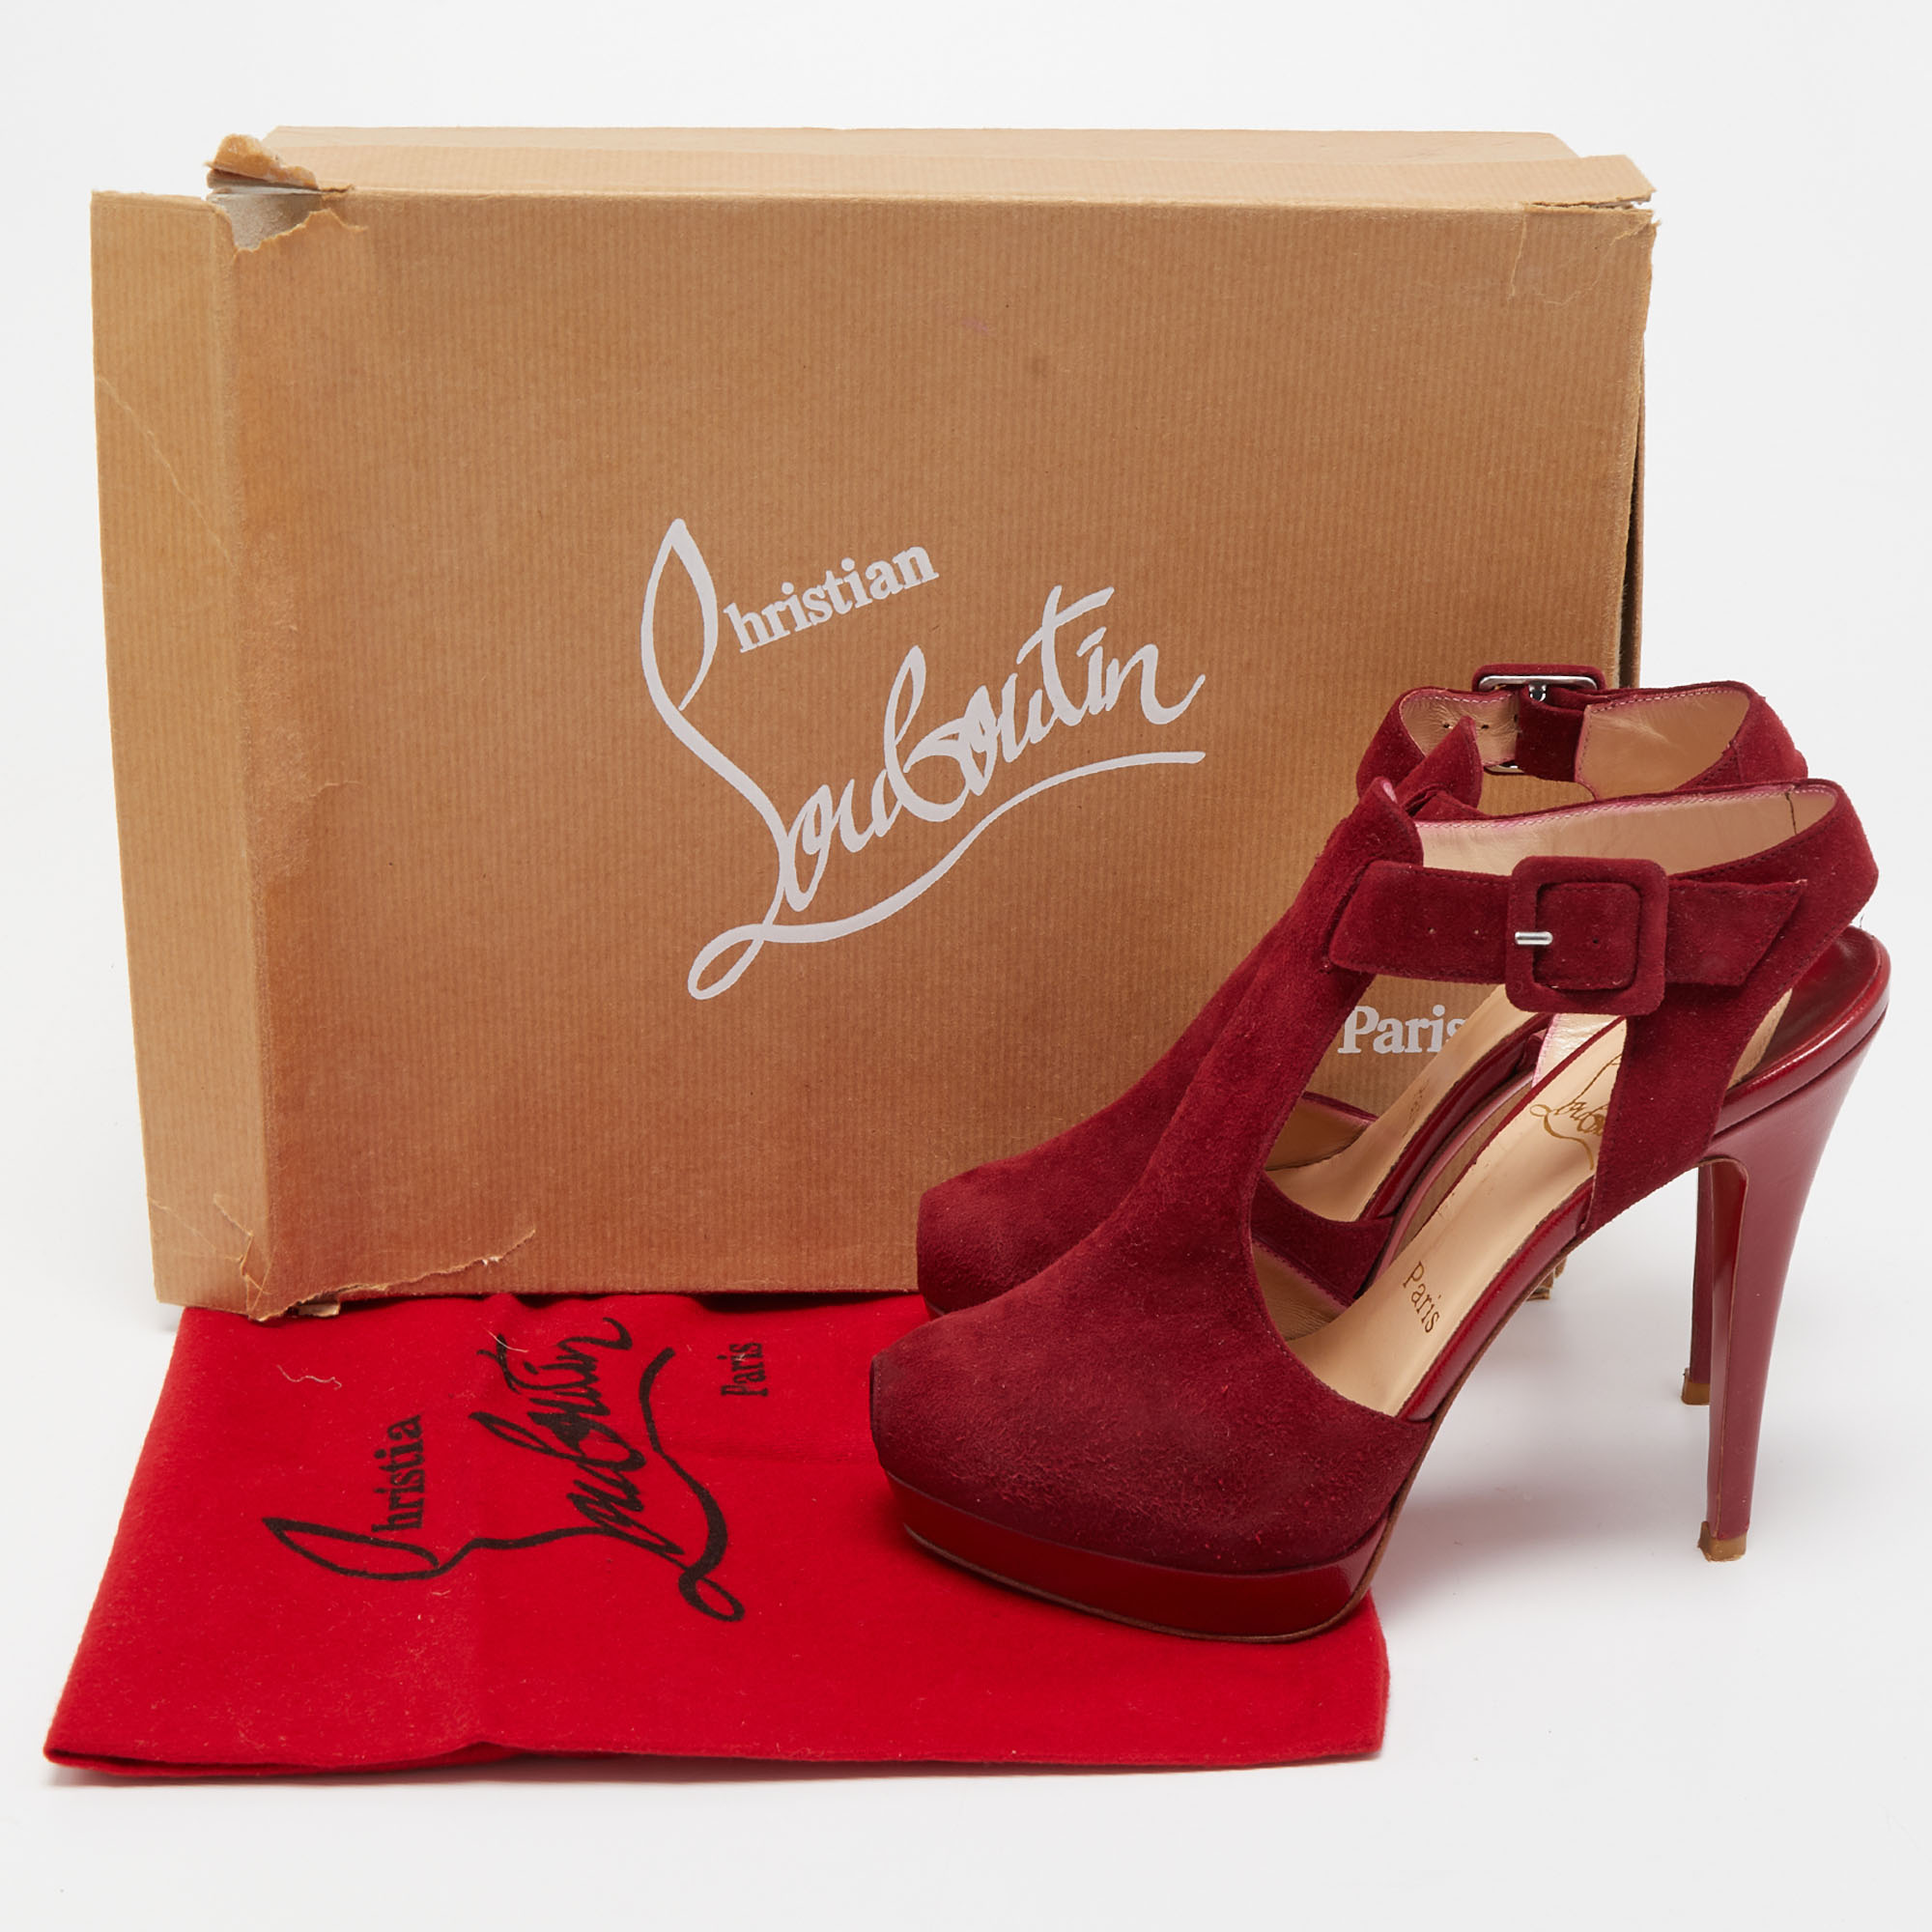 Christian Louboutin Red Suede Peep Toe Platform Sandals Size 37